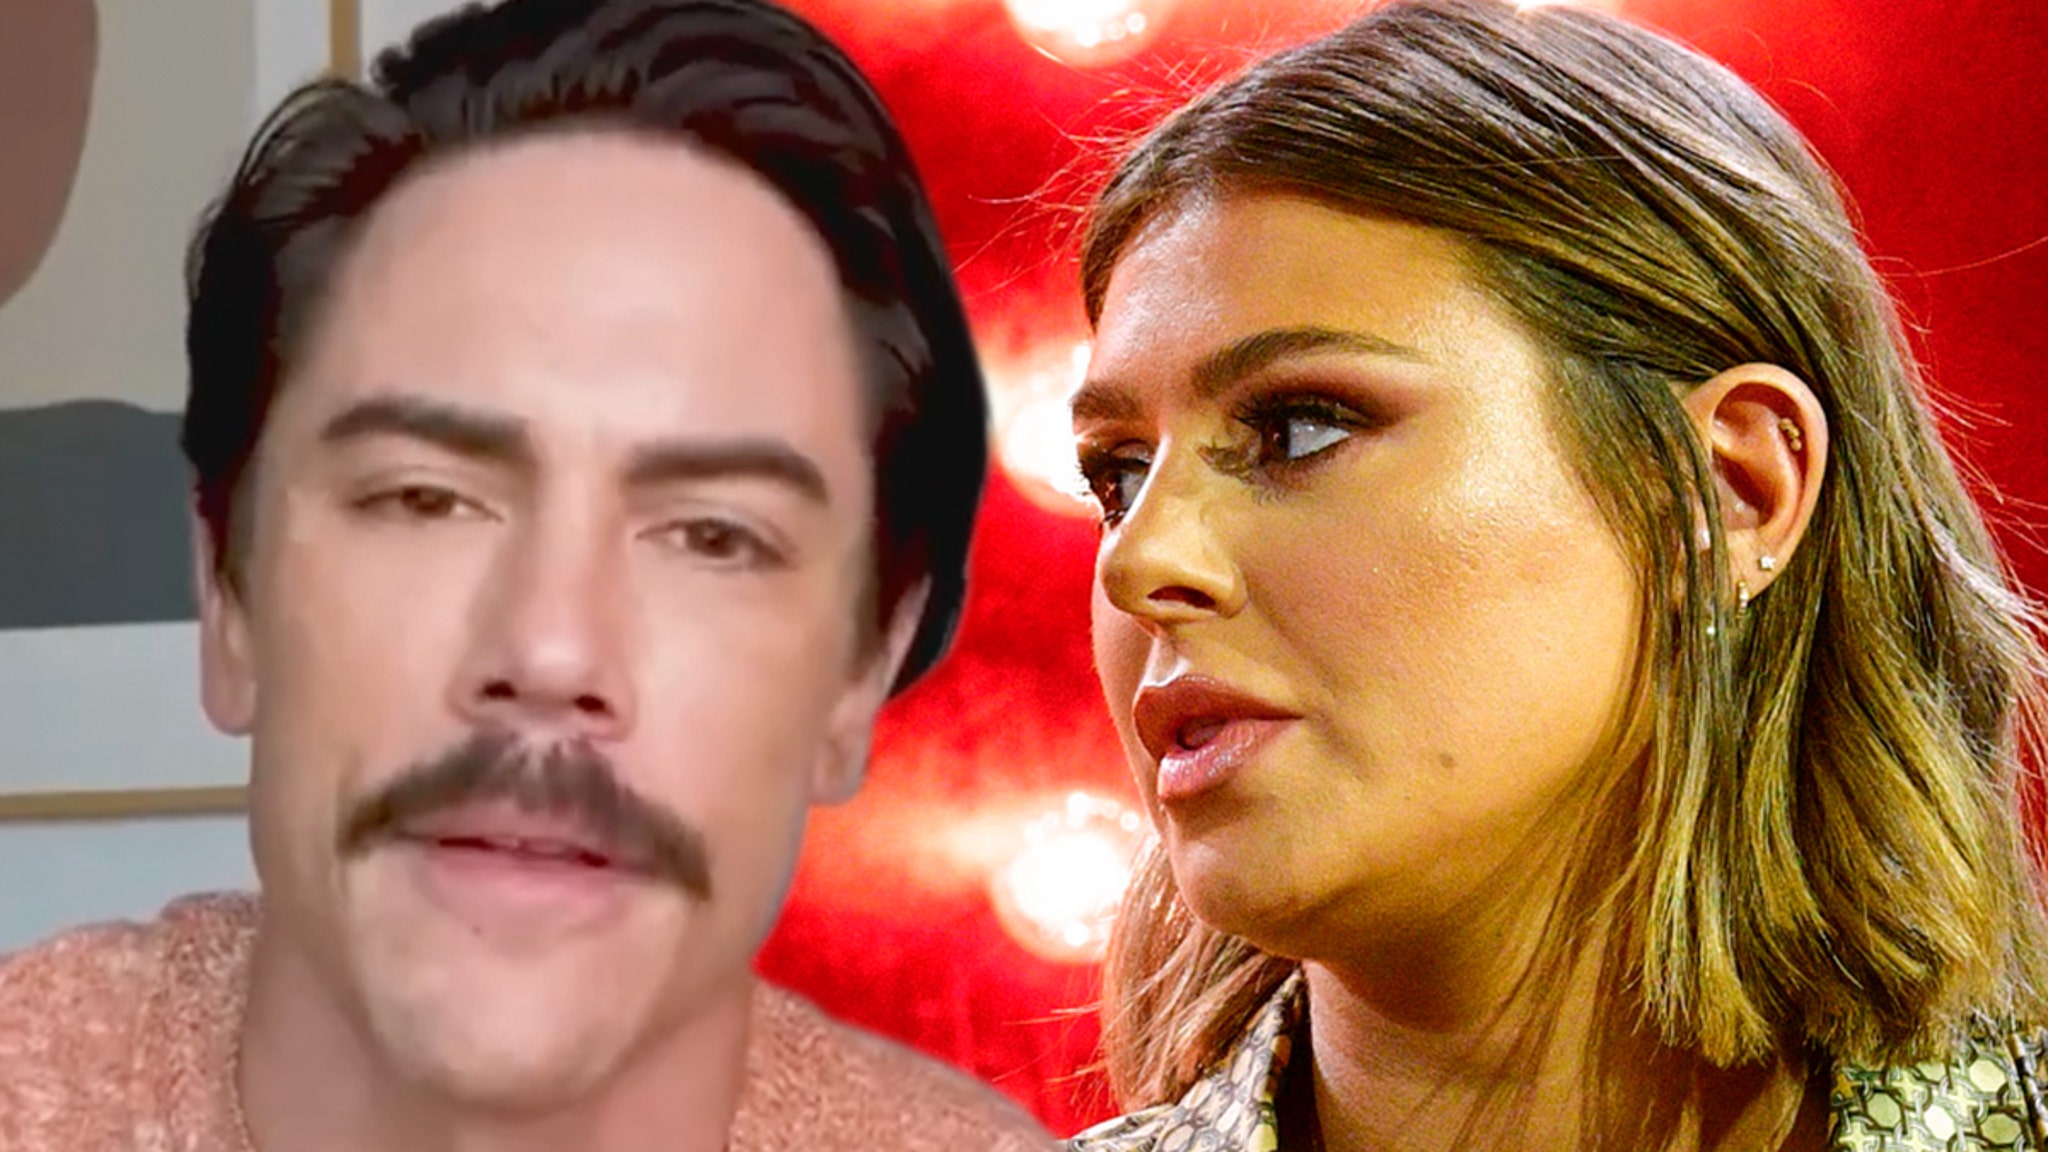 Tom Sandoval, Raquel Leviss Had Code Names For Each Other On Their Cell Phones